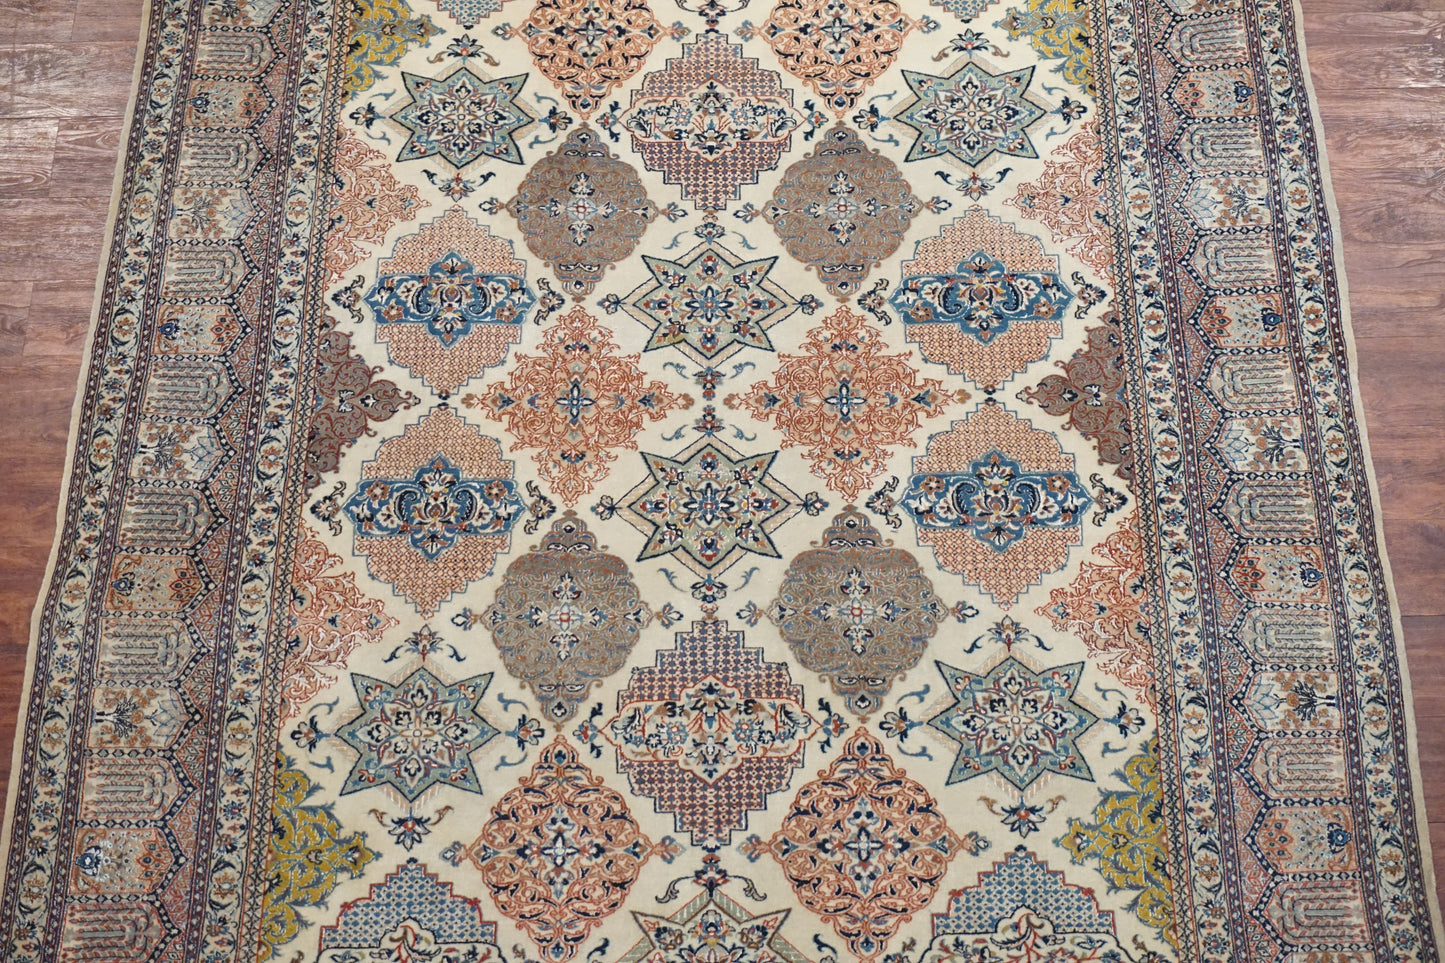 6X9 Ivory Wool and Silk Persian Naein Area Rug, circa 1970